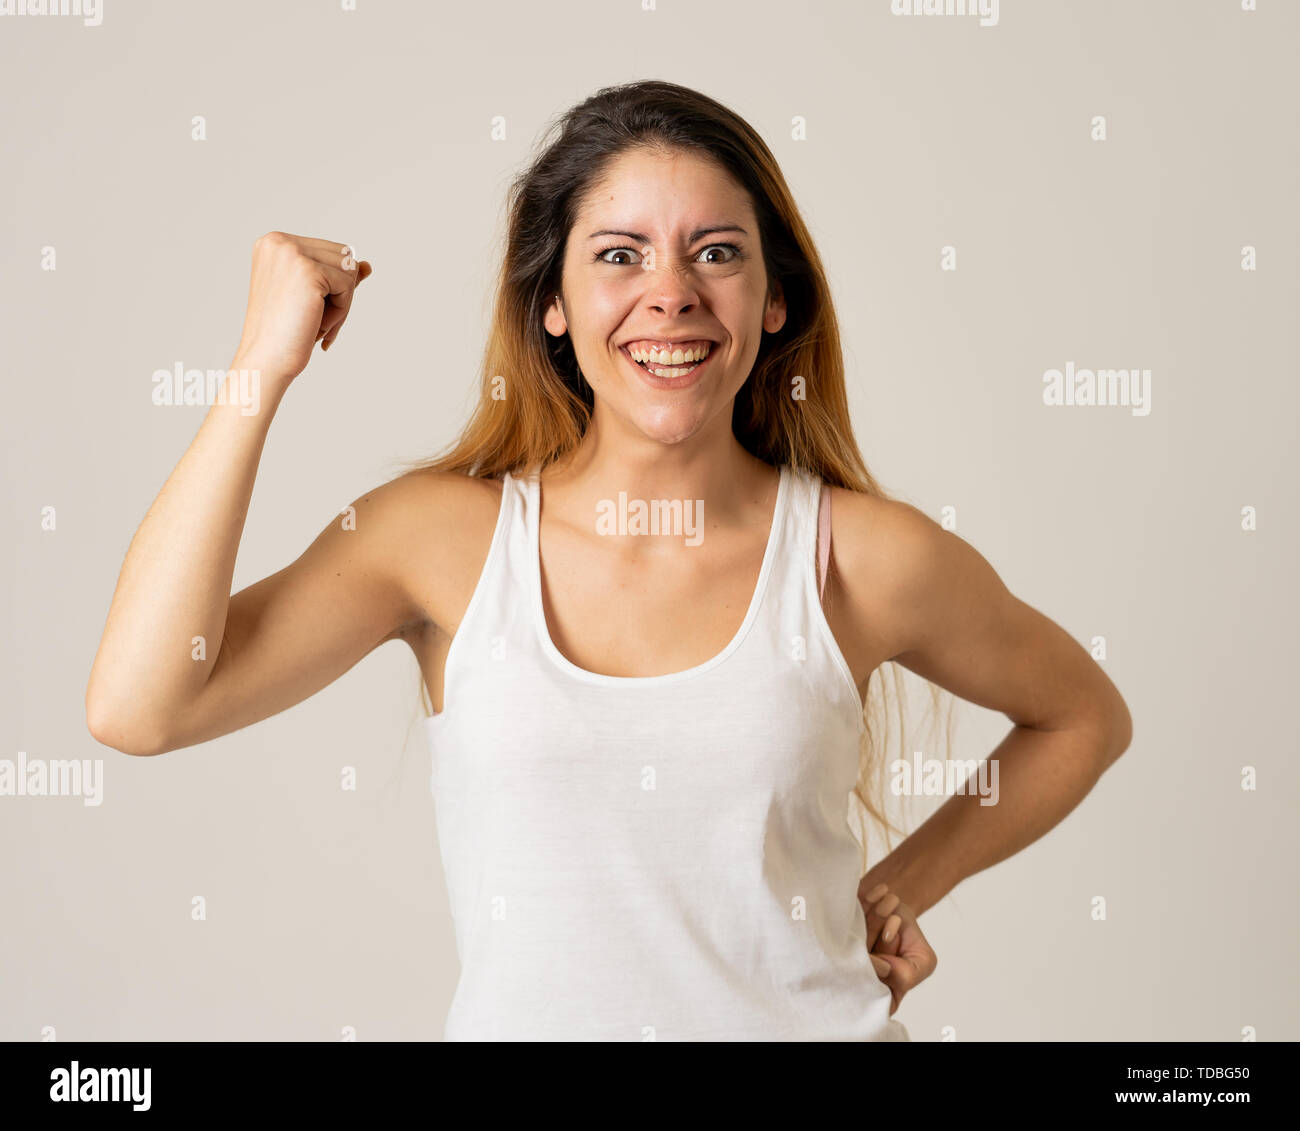 Portrait of beautiful shocked teenager girl winning or having great success with surprised and happy face feeling so excited. Human Expression Positiv Stock Photo